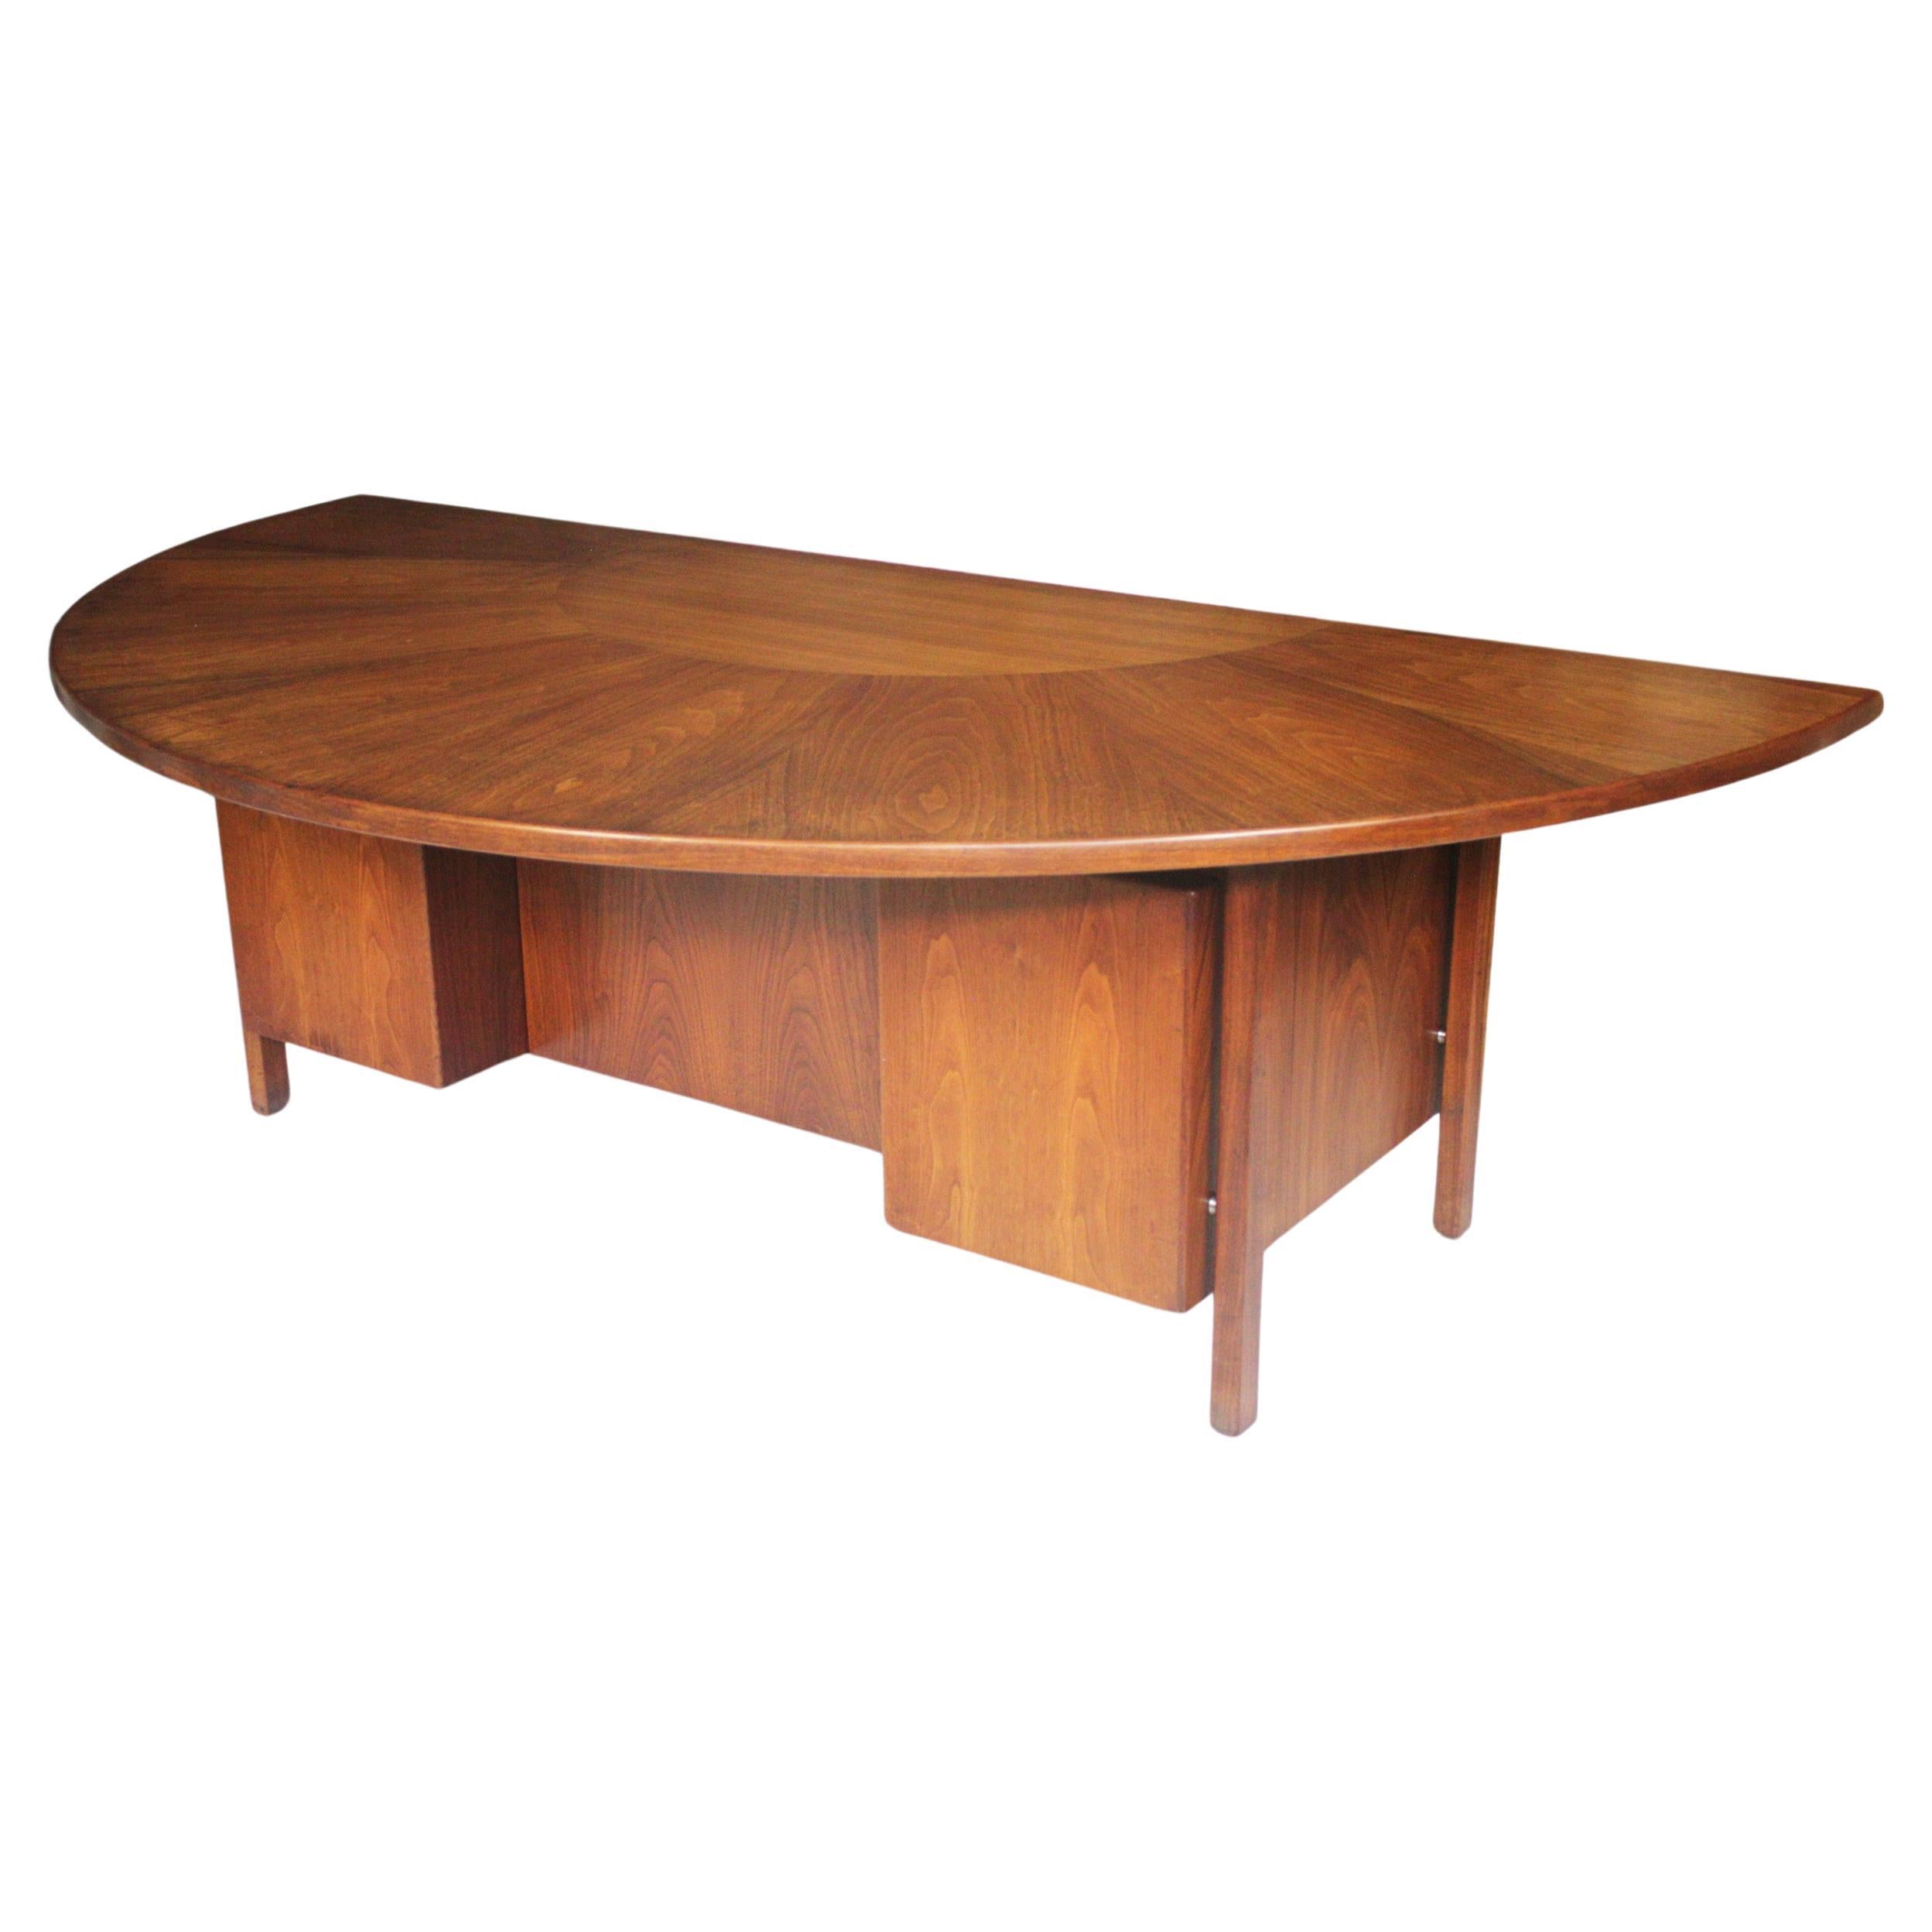 Spectacular Mid-Century Modern Walnut Demilune Executive Desk by Jens Risom For Sale